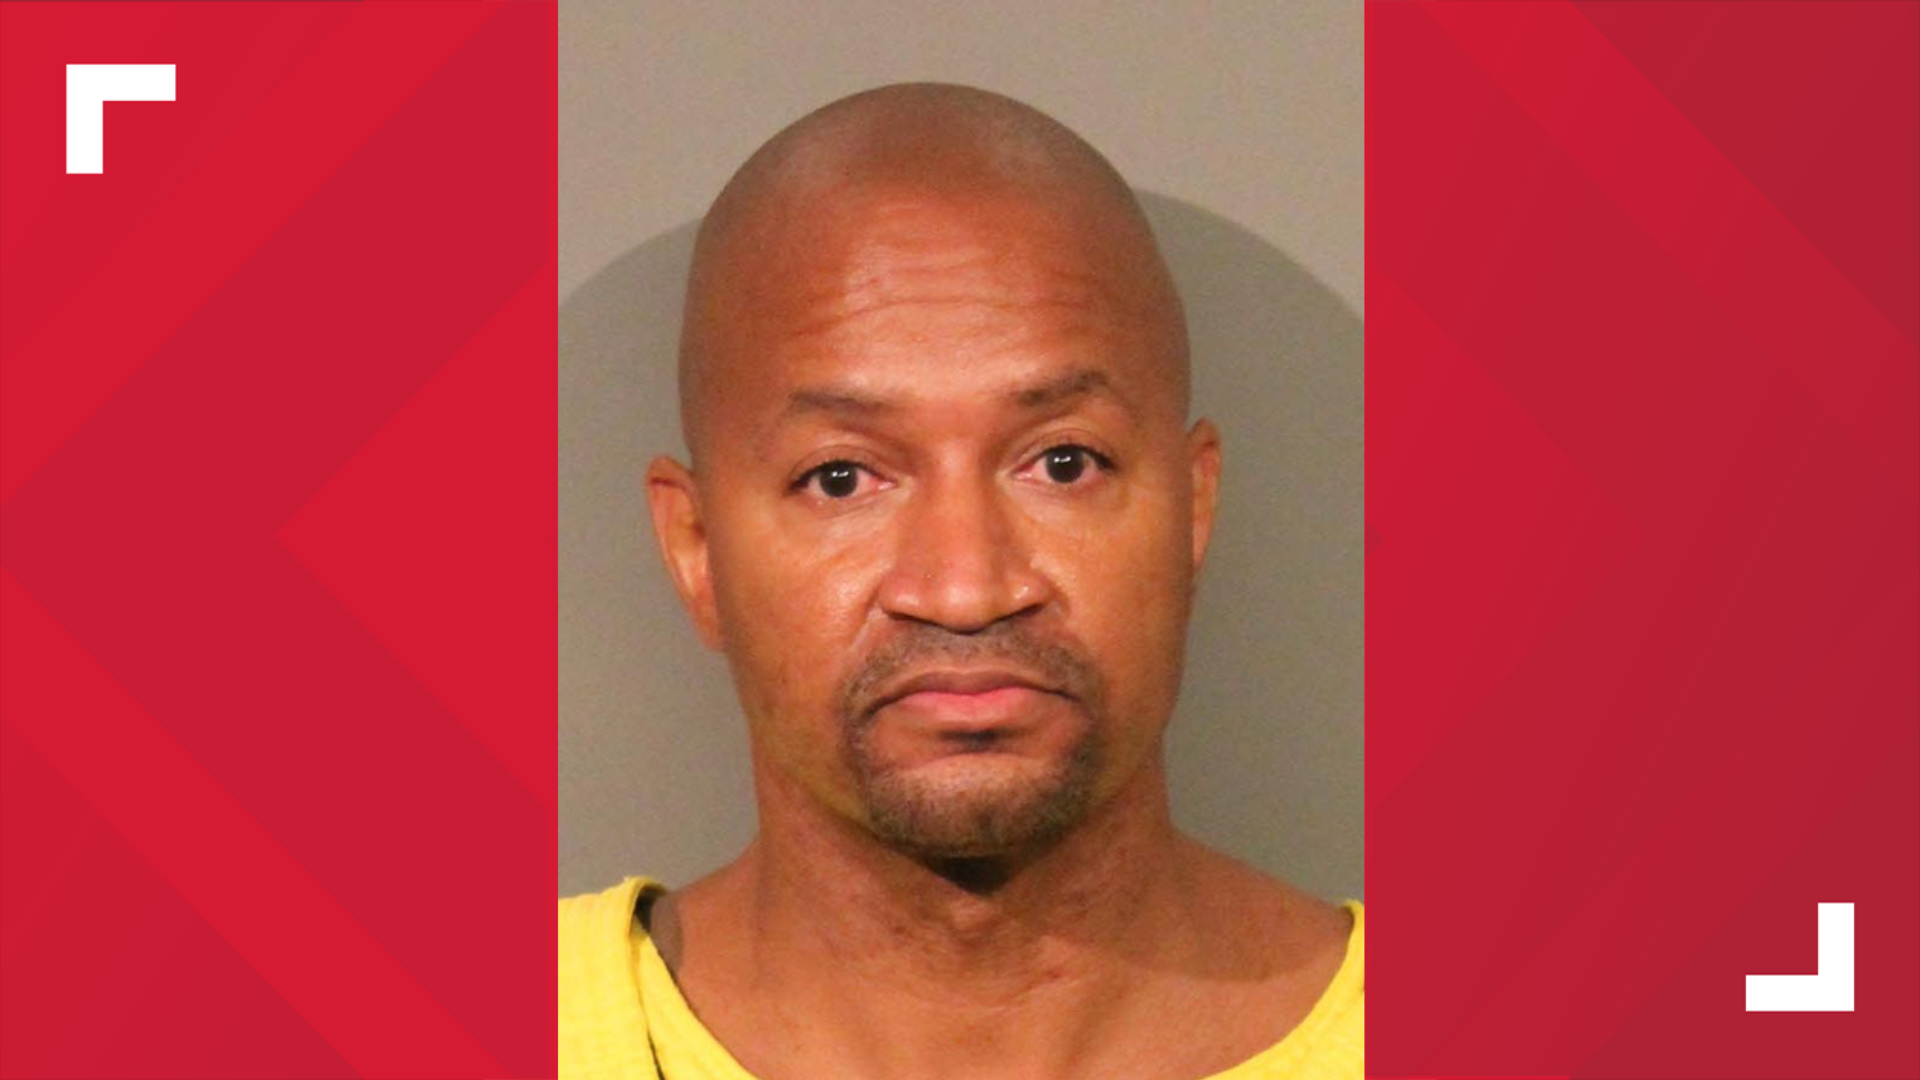 Johnnie Jordan is accused of shooting and killing his ex-fiancé Vita Joga while she was at her waitressing job at Roseville's House of Oliver on Monday.